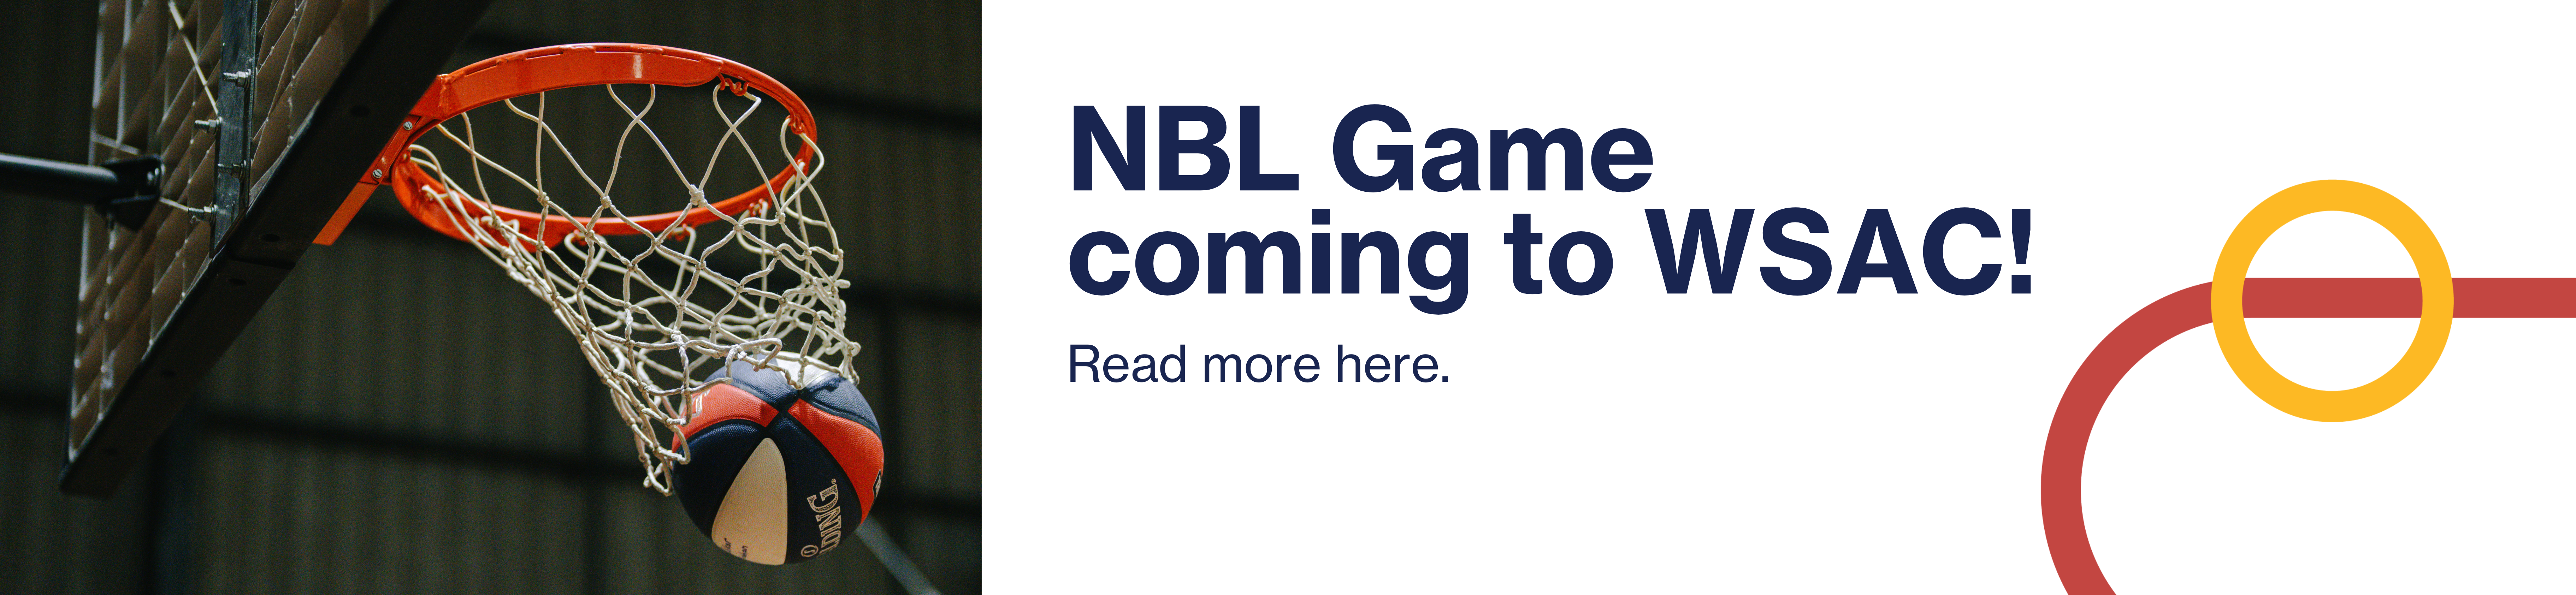 NBL game coming to WSAC web banner.png